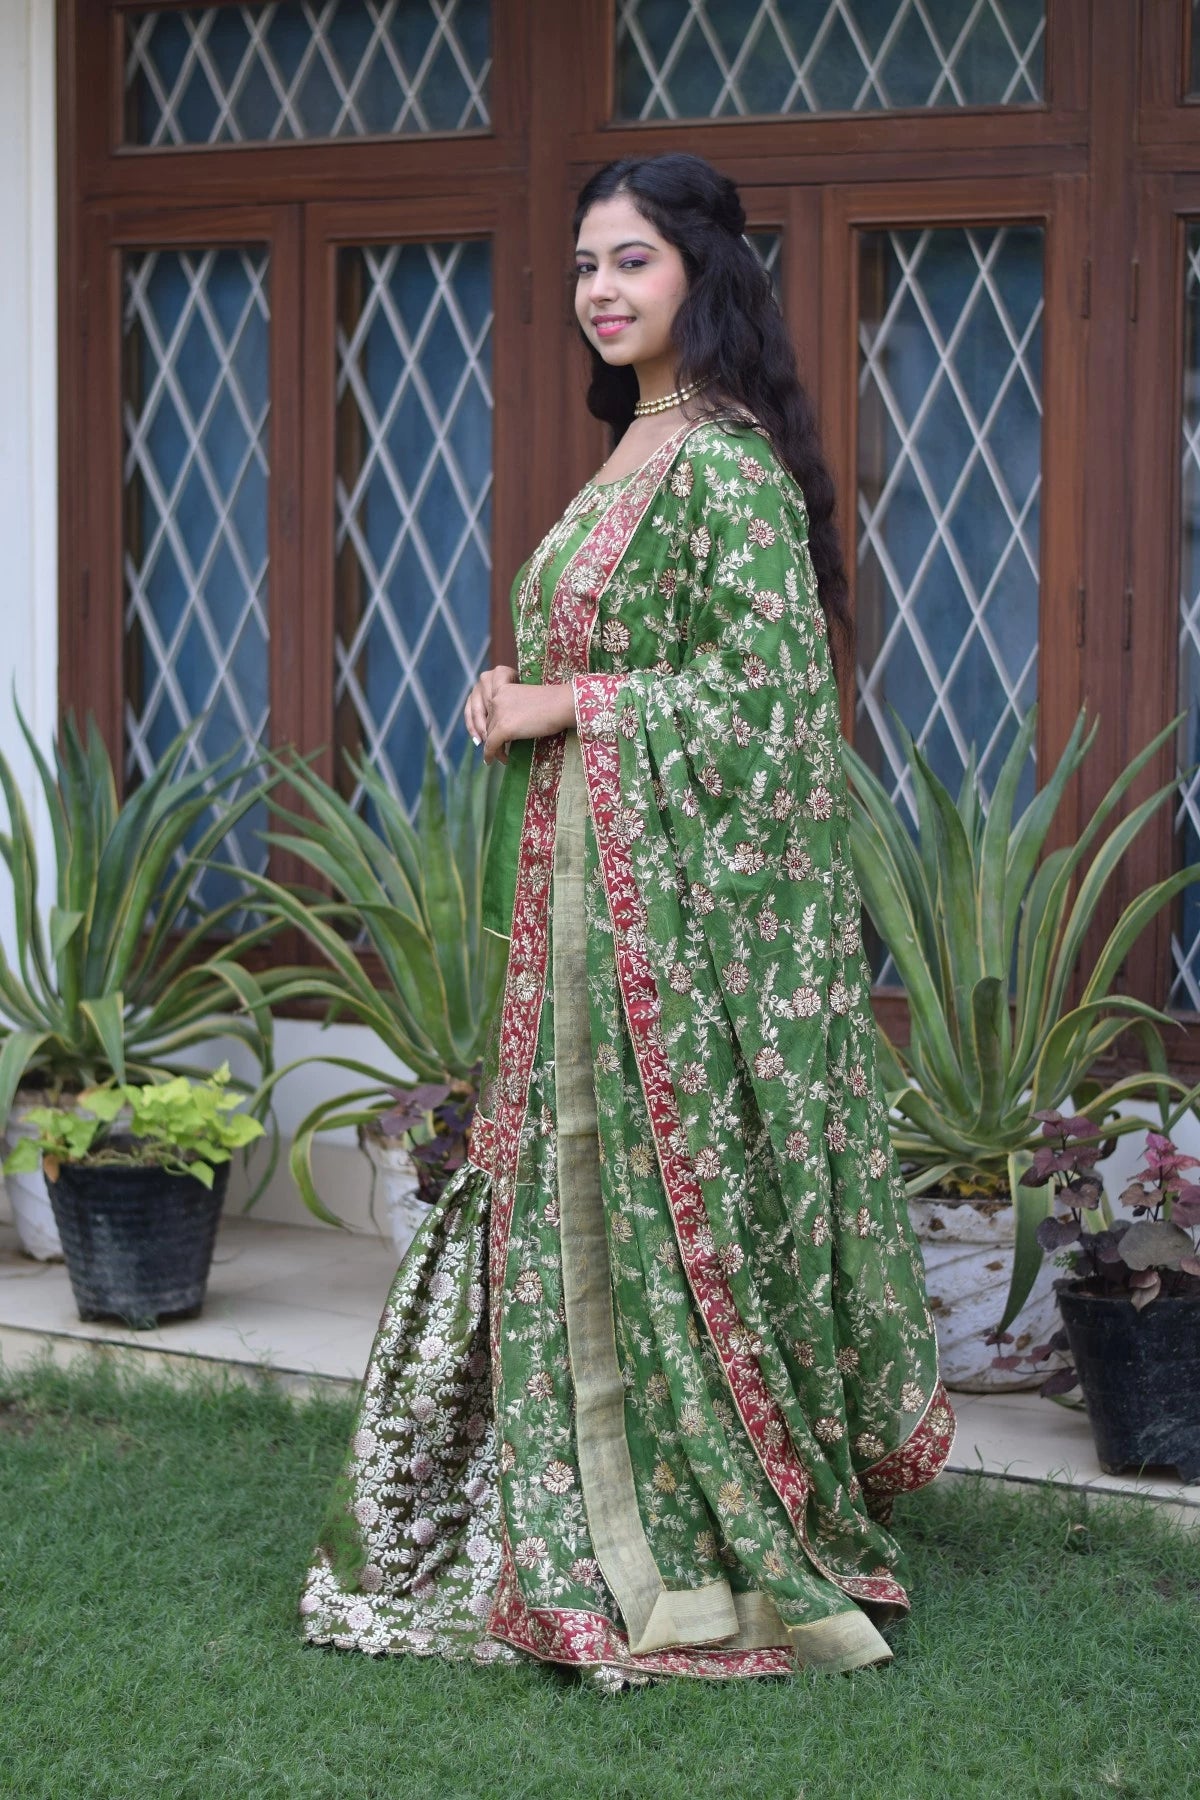 A beautiful Indian bride donning a green silk and kamkhab zardozi embroidered gharara suit.